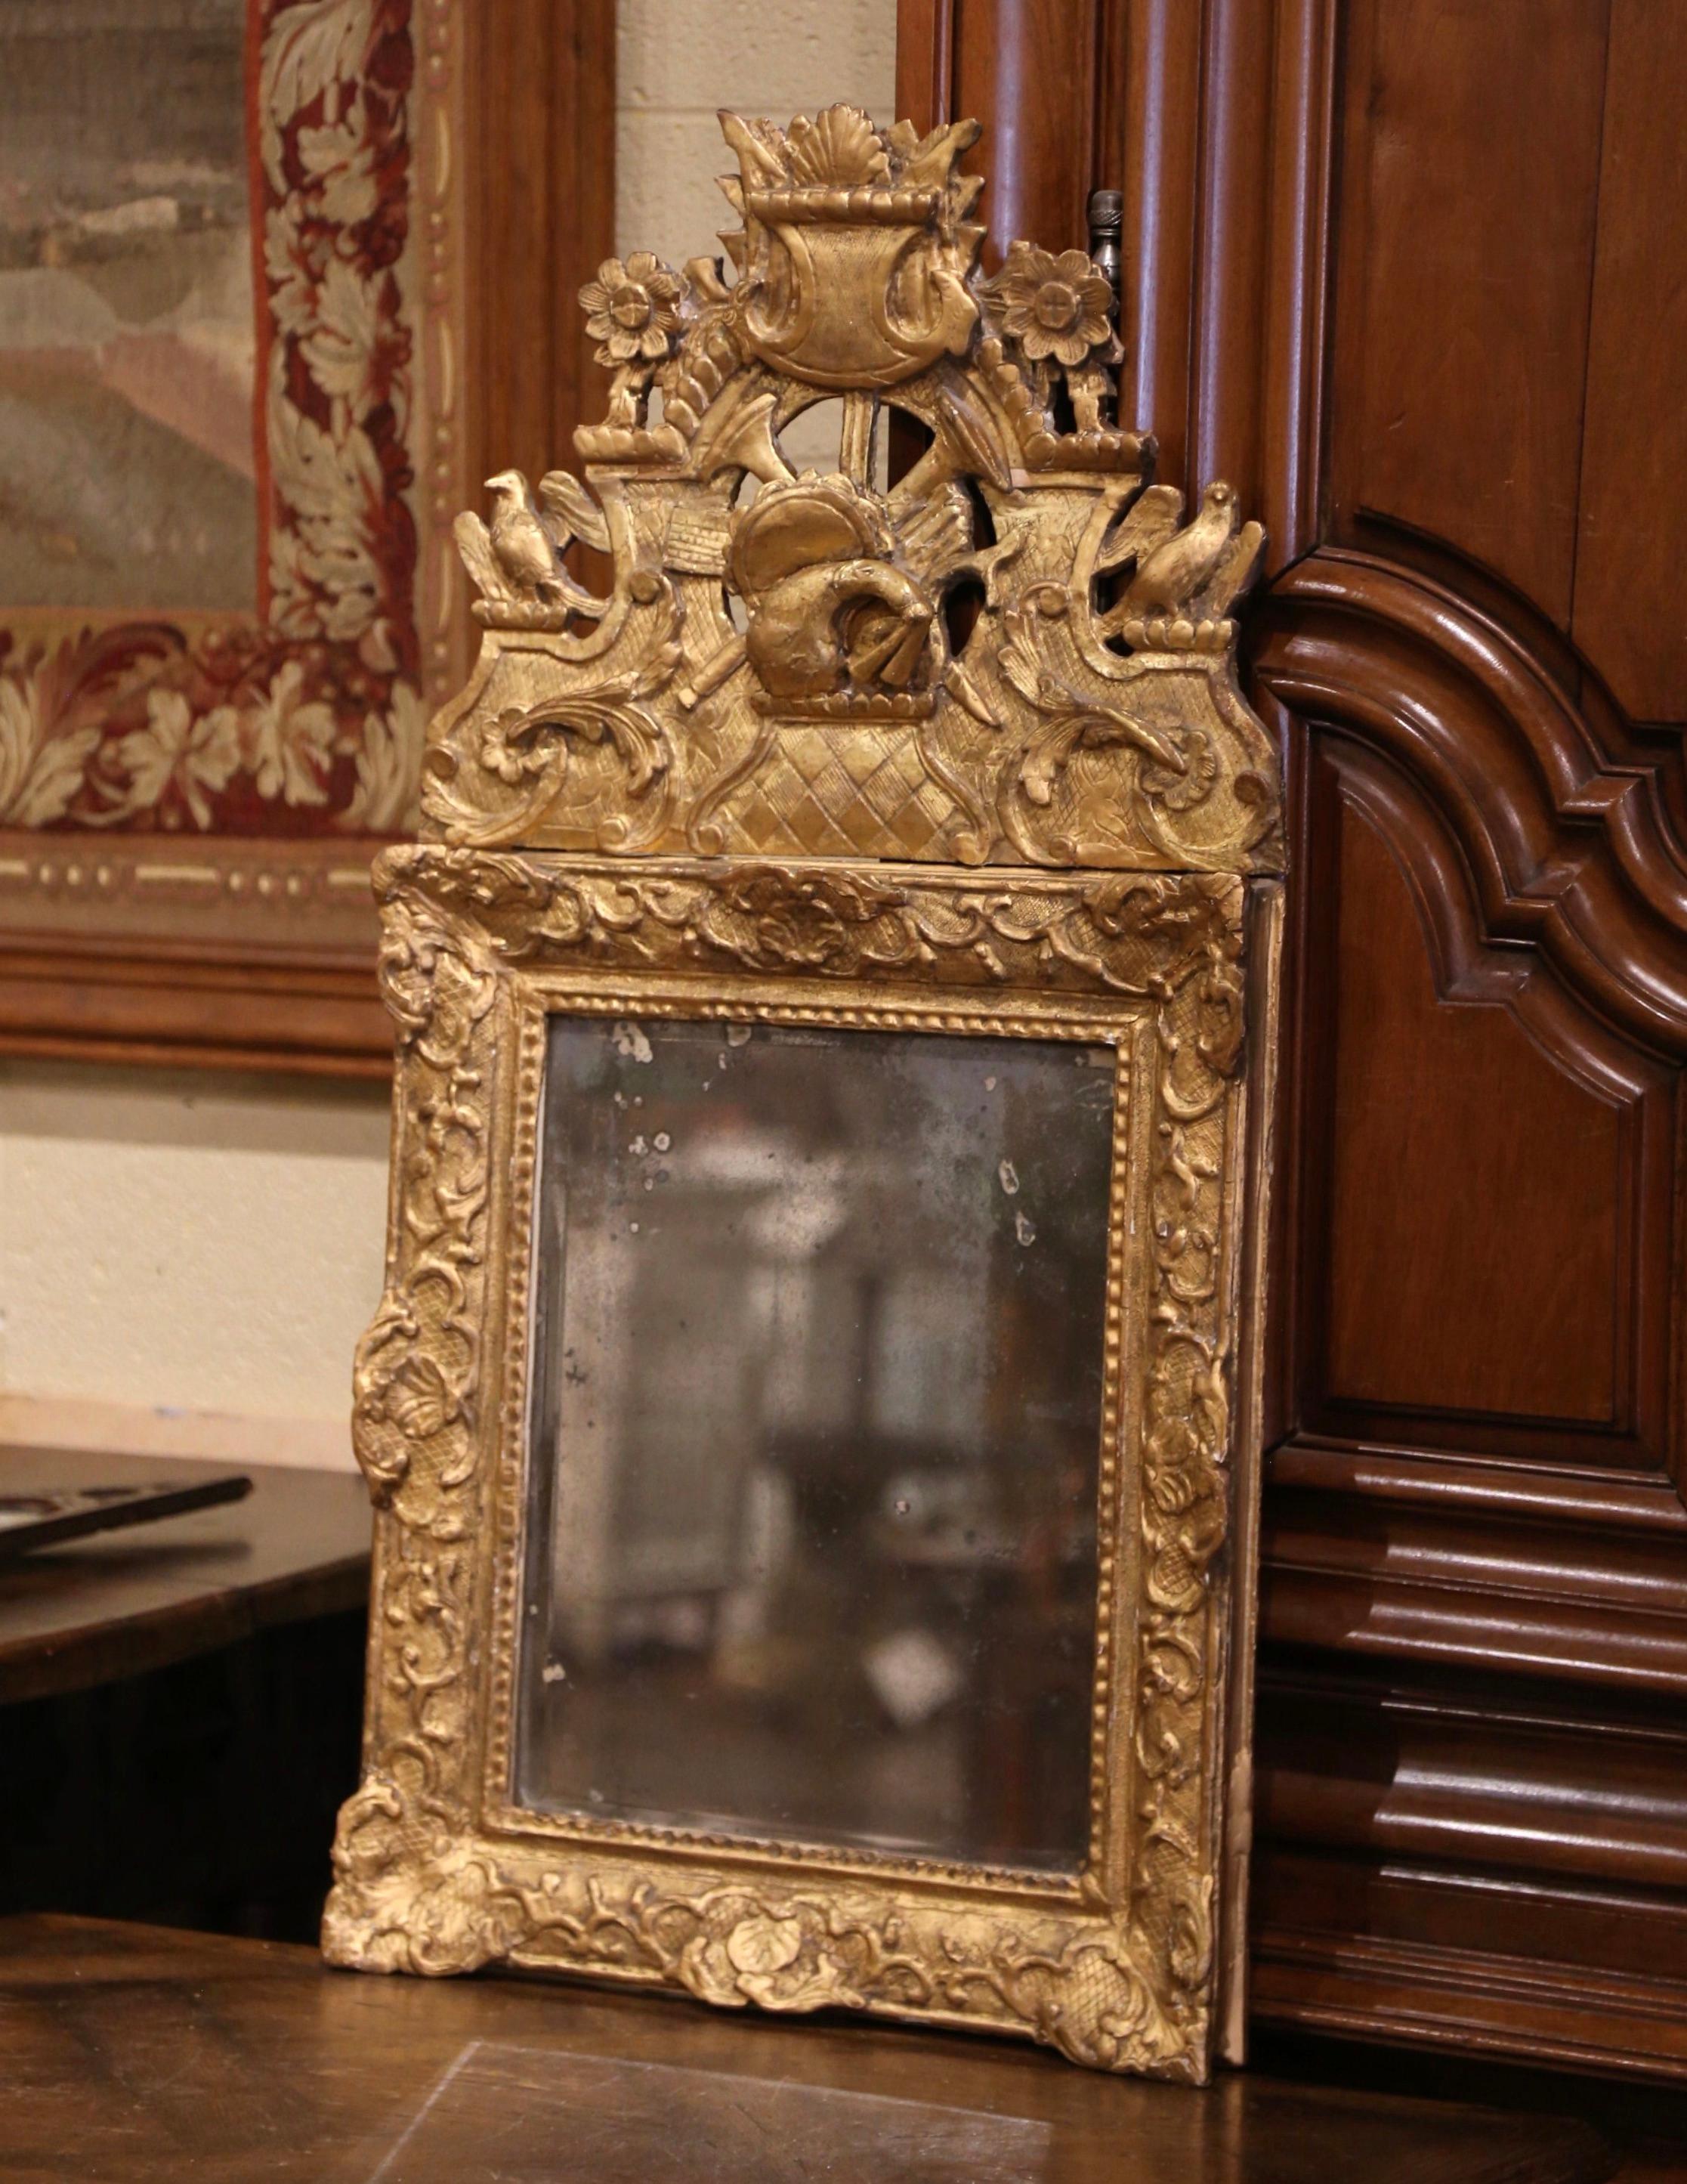 This elegant, antique mirror would make a charming addition to a hallway or powder room. Crafted in Southern France, circa 1780 and rectangular in shape, the gilt wood mirror is heavily carved and exemplifies the design elements of the Rococo and